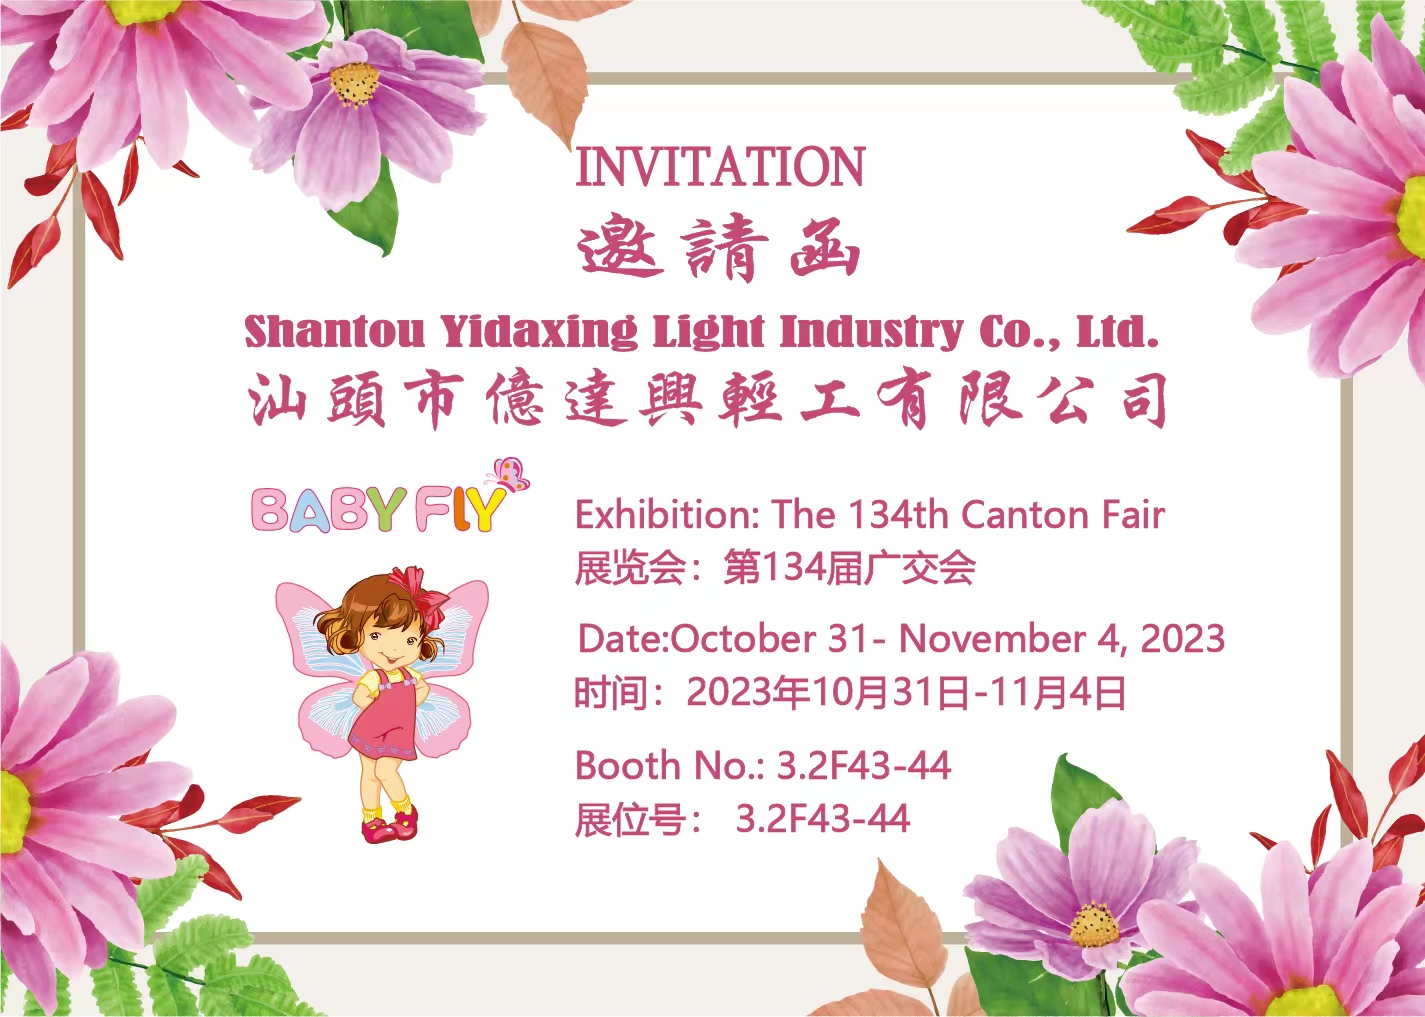 Shantou Yidaxing Showcases Kidly Sandals and Customization Services at the 134th Canton Fair